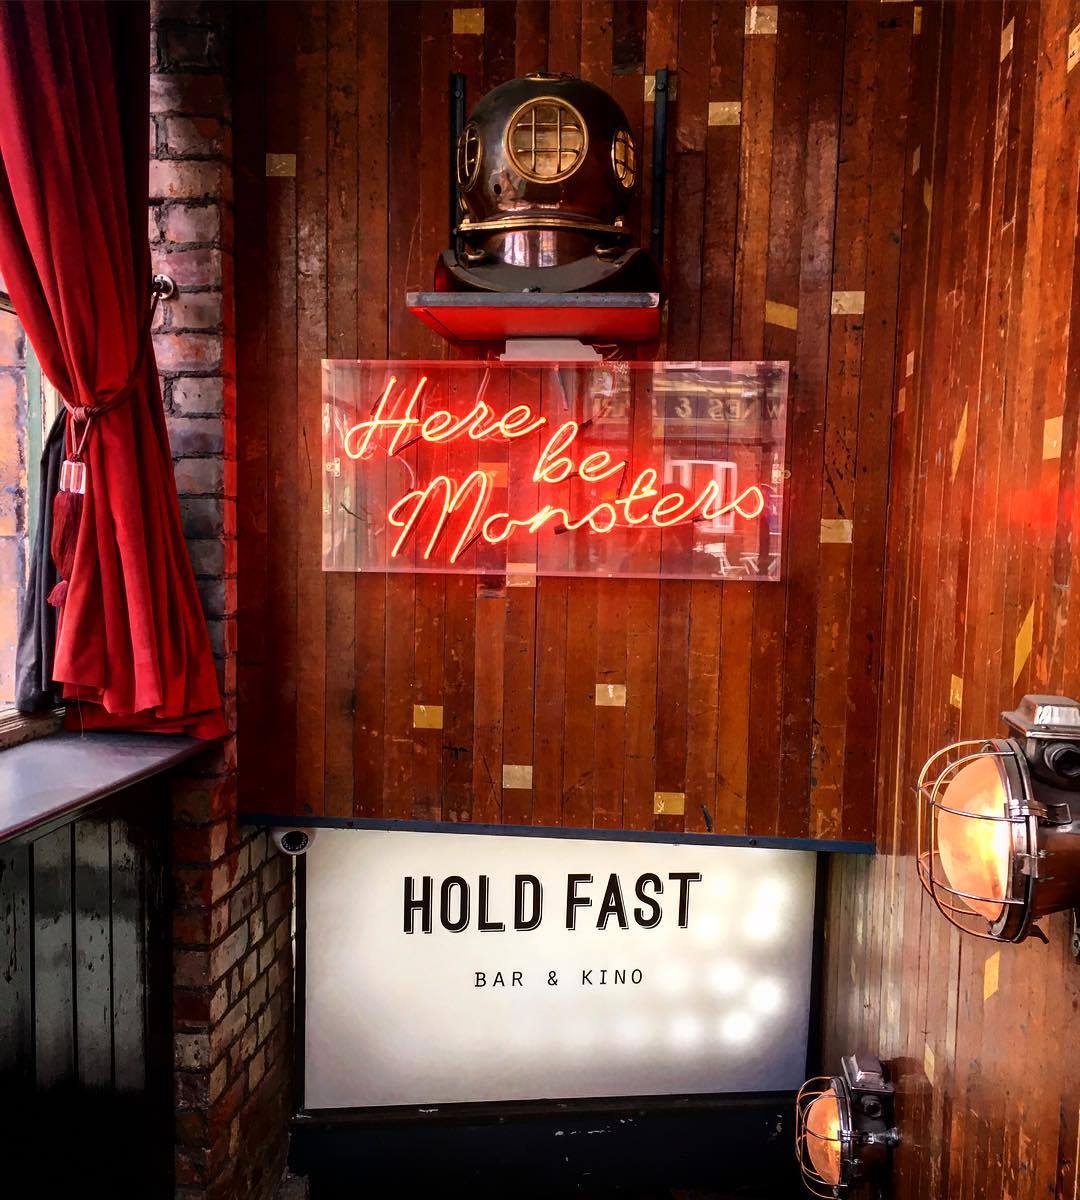 Hold Fast has announced its return to Manchester